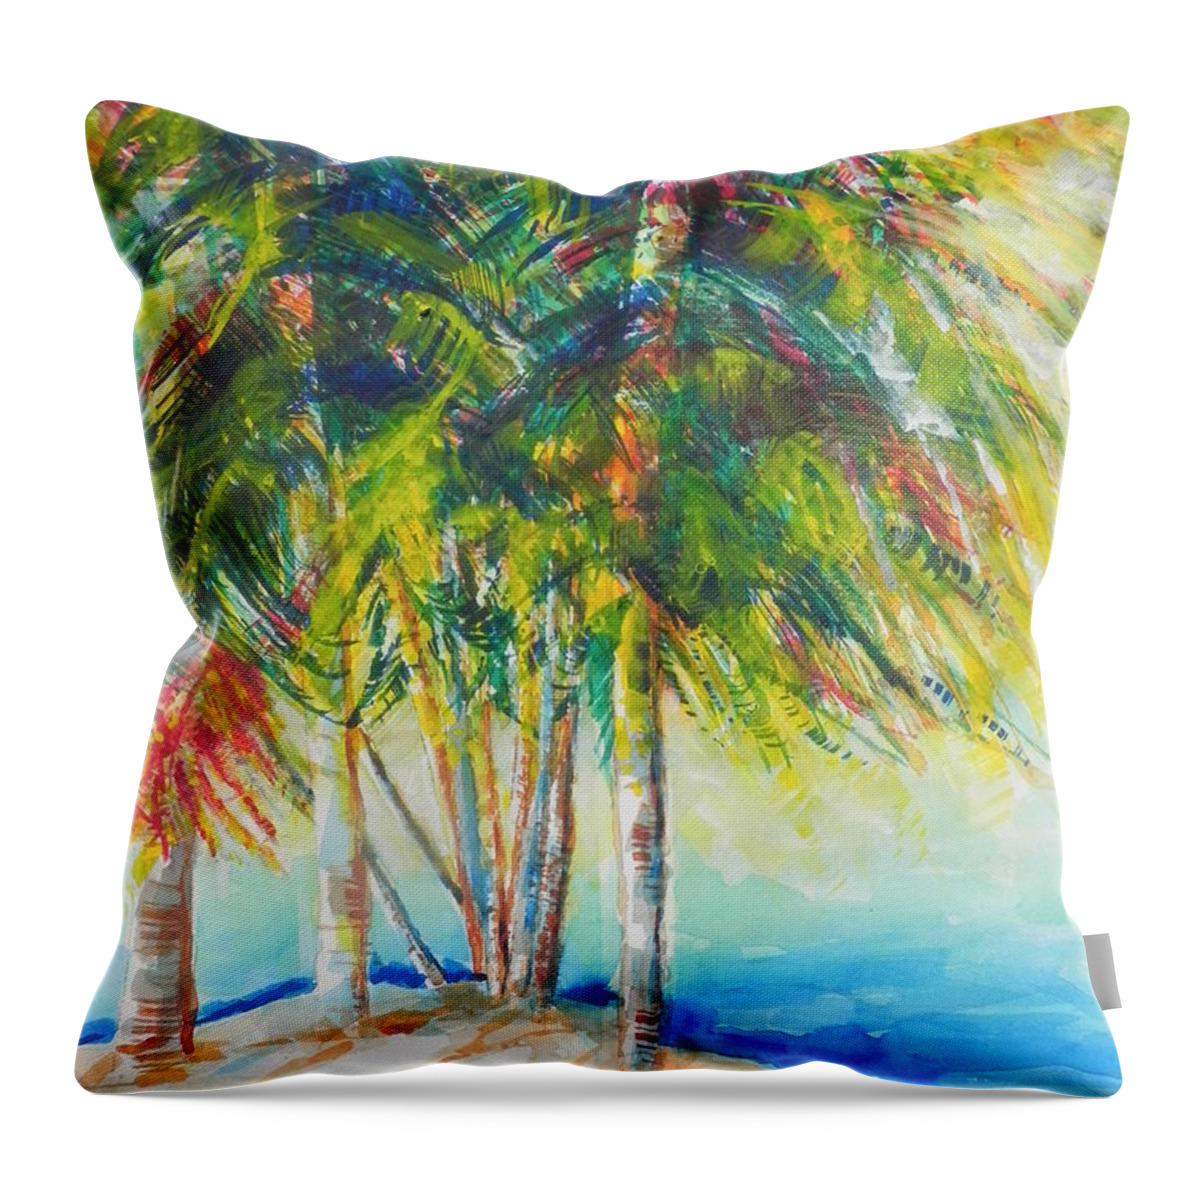 Watercolor Painting Throw Pillow featuring the painting Florida Inspiration by Chrisann Ellis